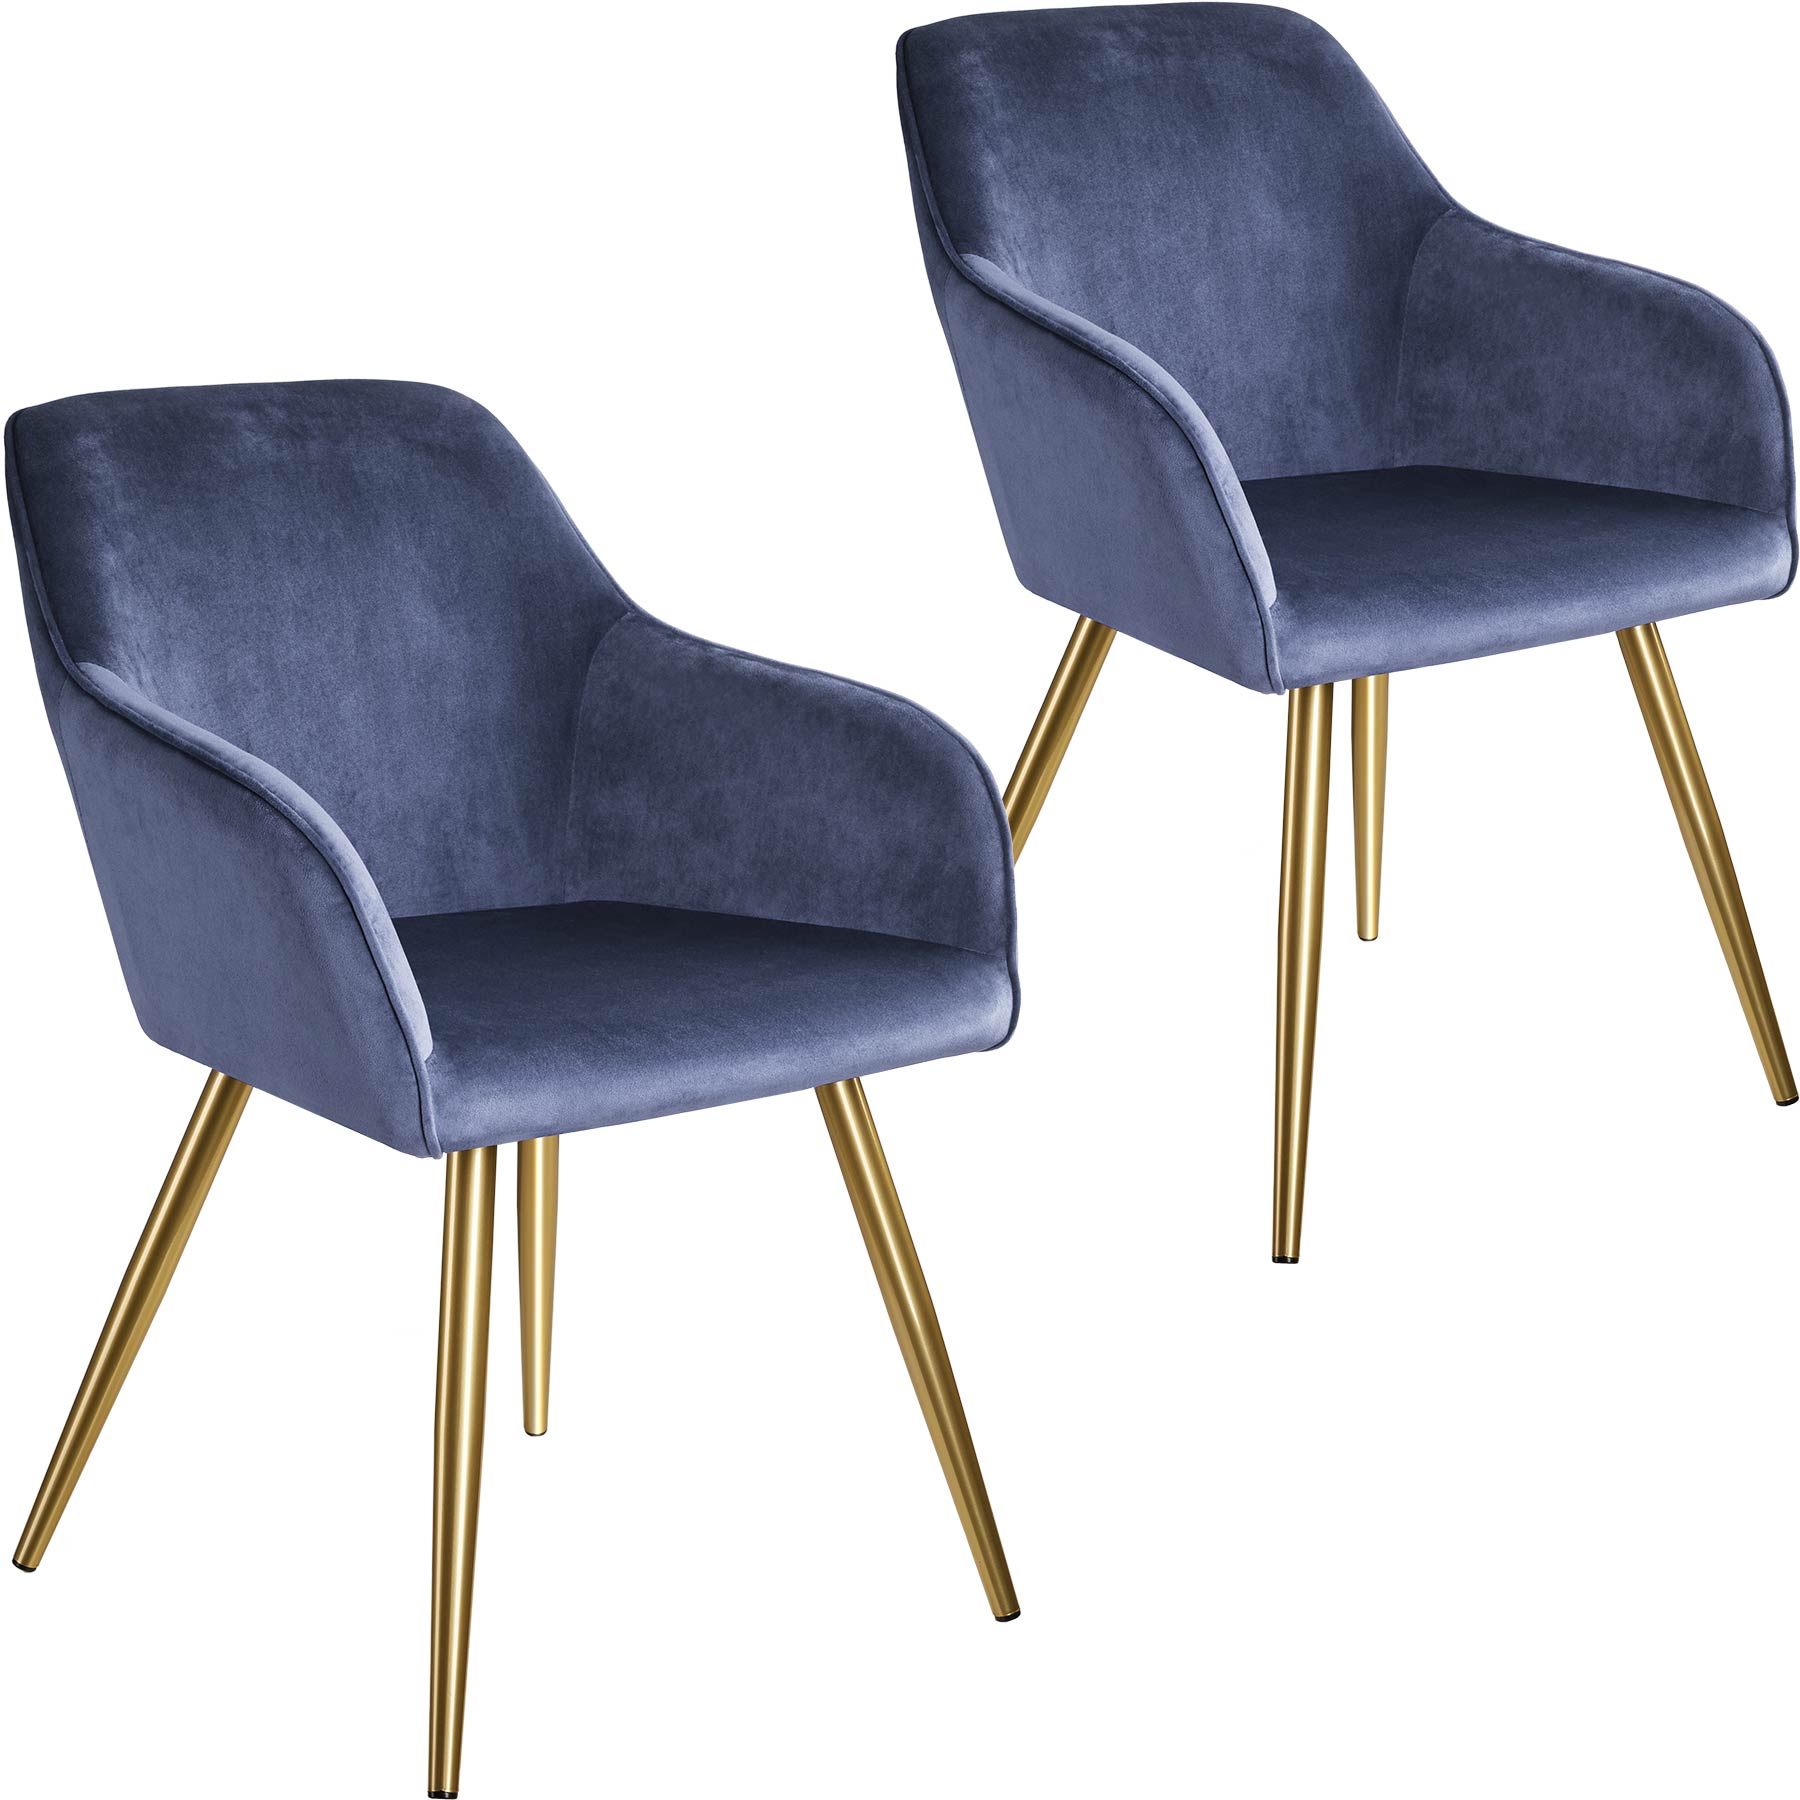 2 Chaises MARILYN Effet Velours Style Scandinave bleu/or